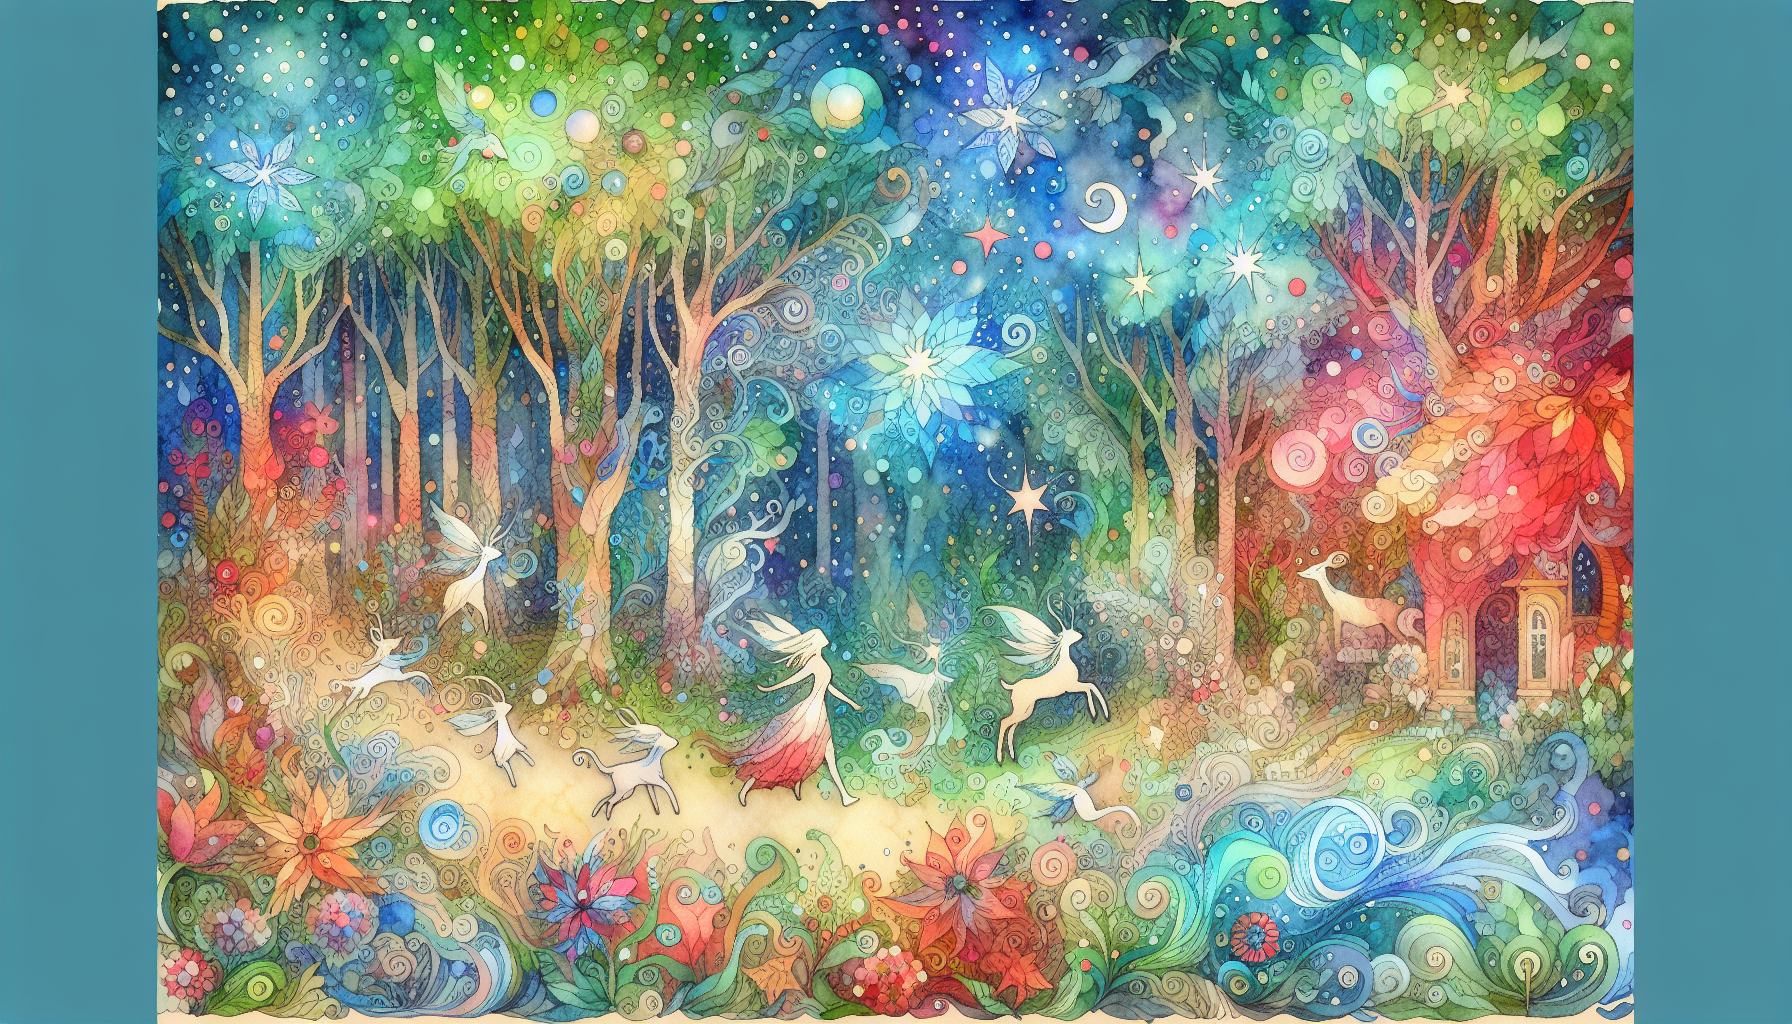 The Starlit Forest Home of the Woodland Spirits